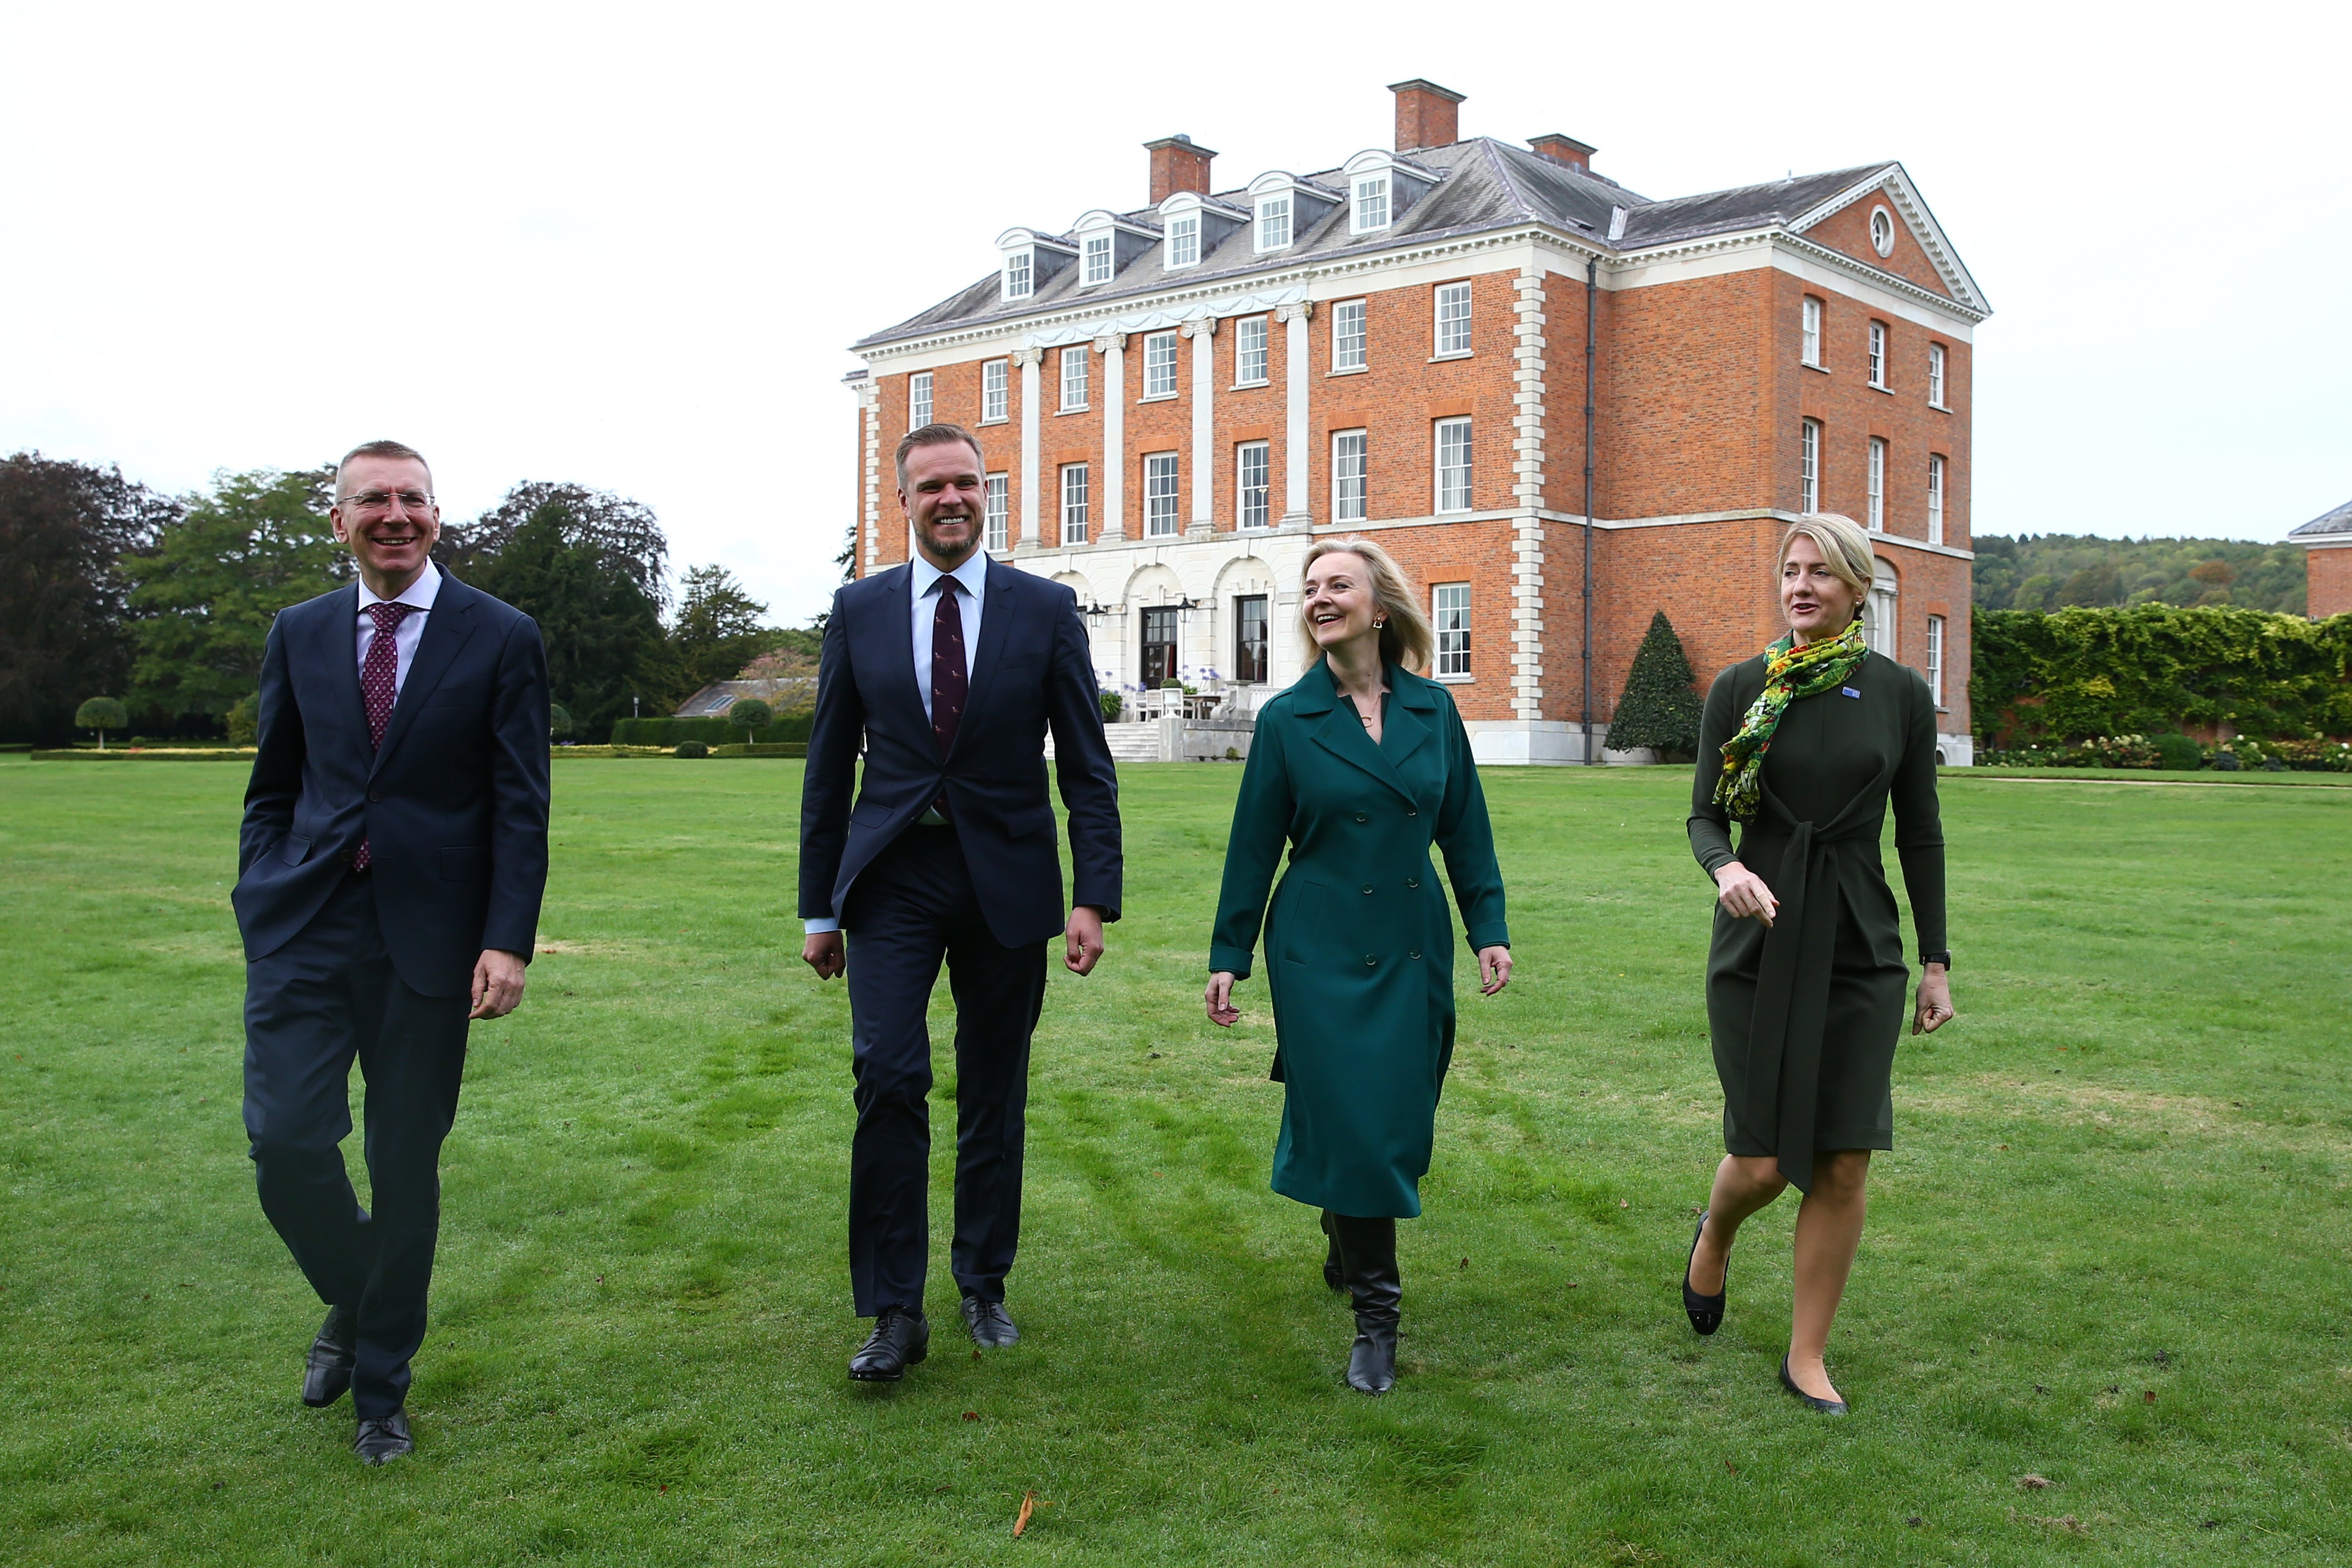 Liz Truss meets with Baltic counterparts at Chevening house